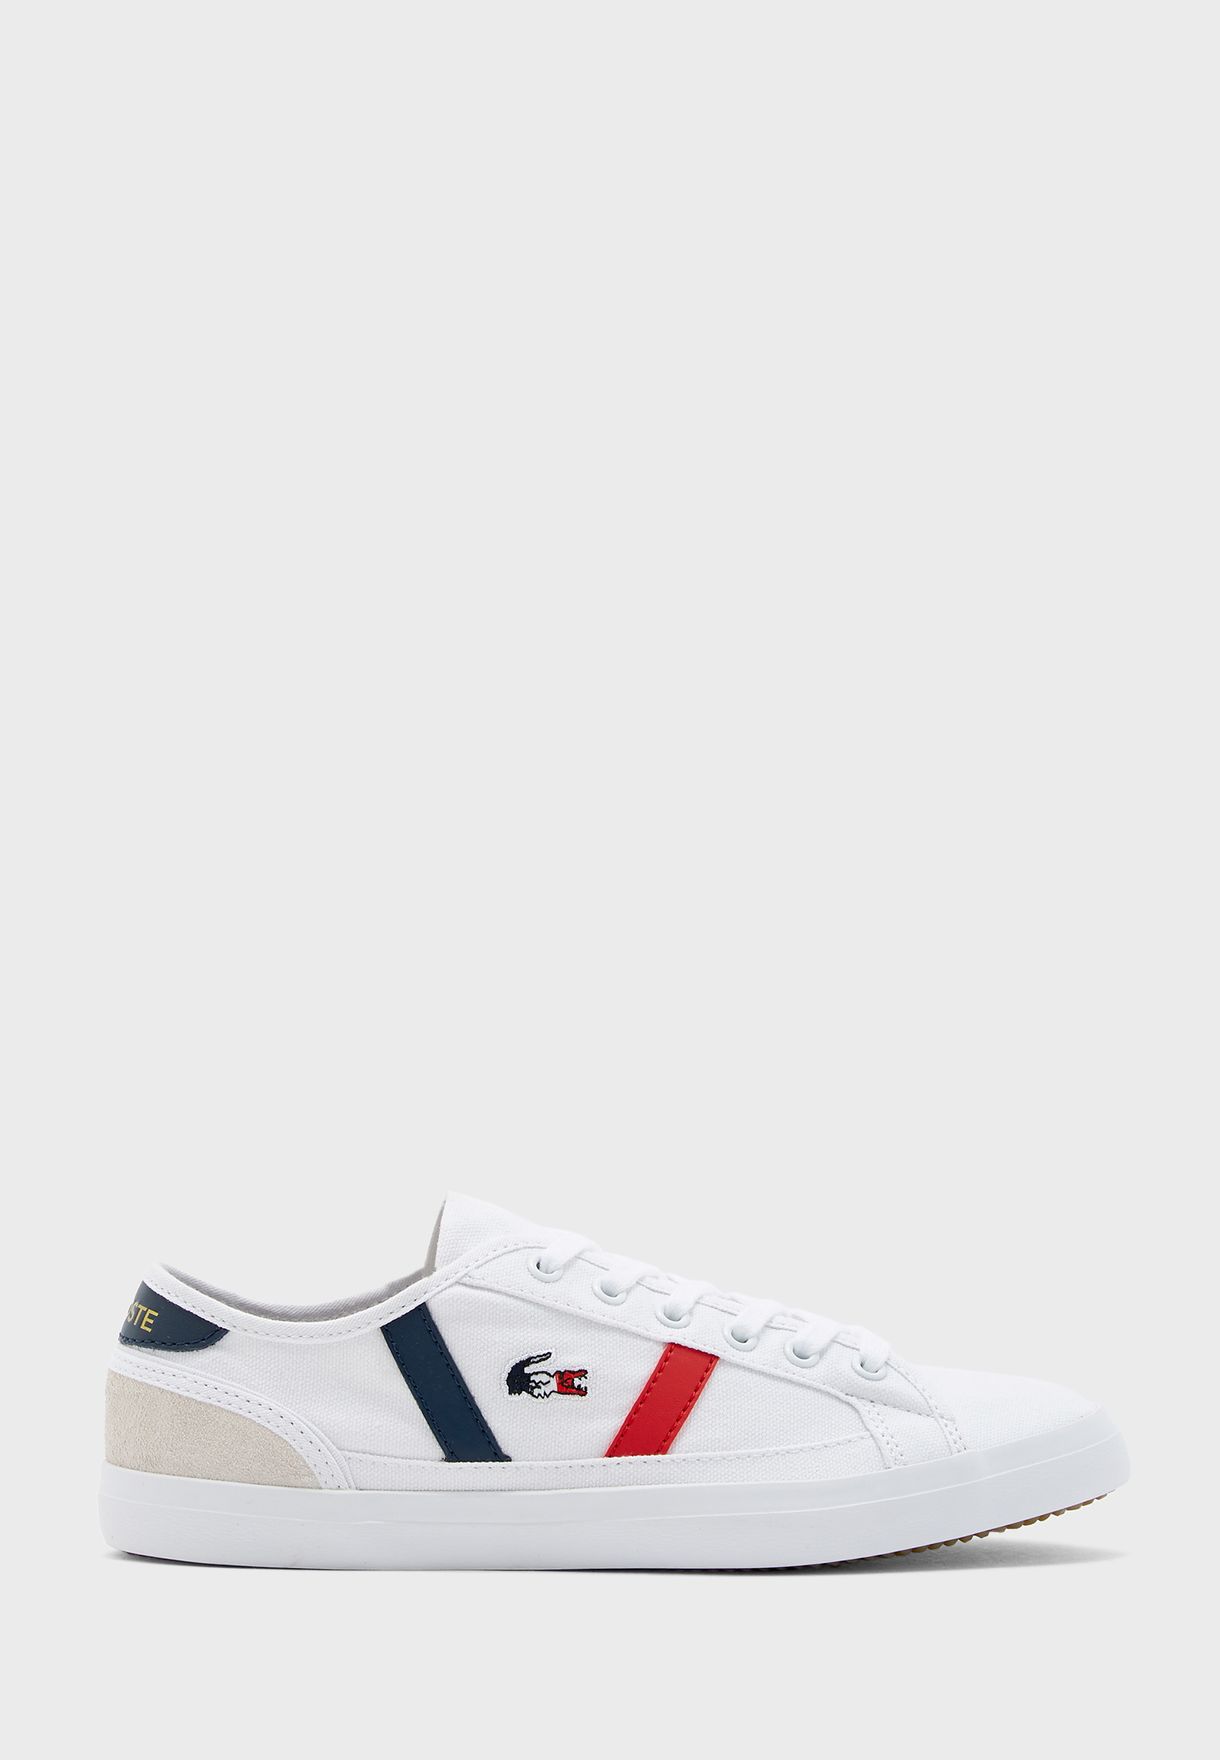 where to buy lacoste shoes